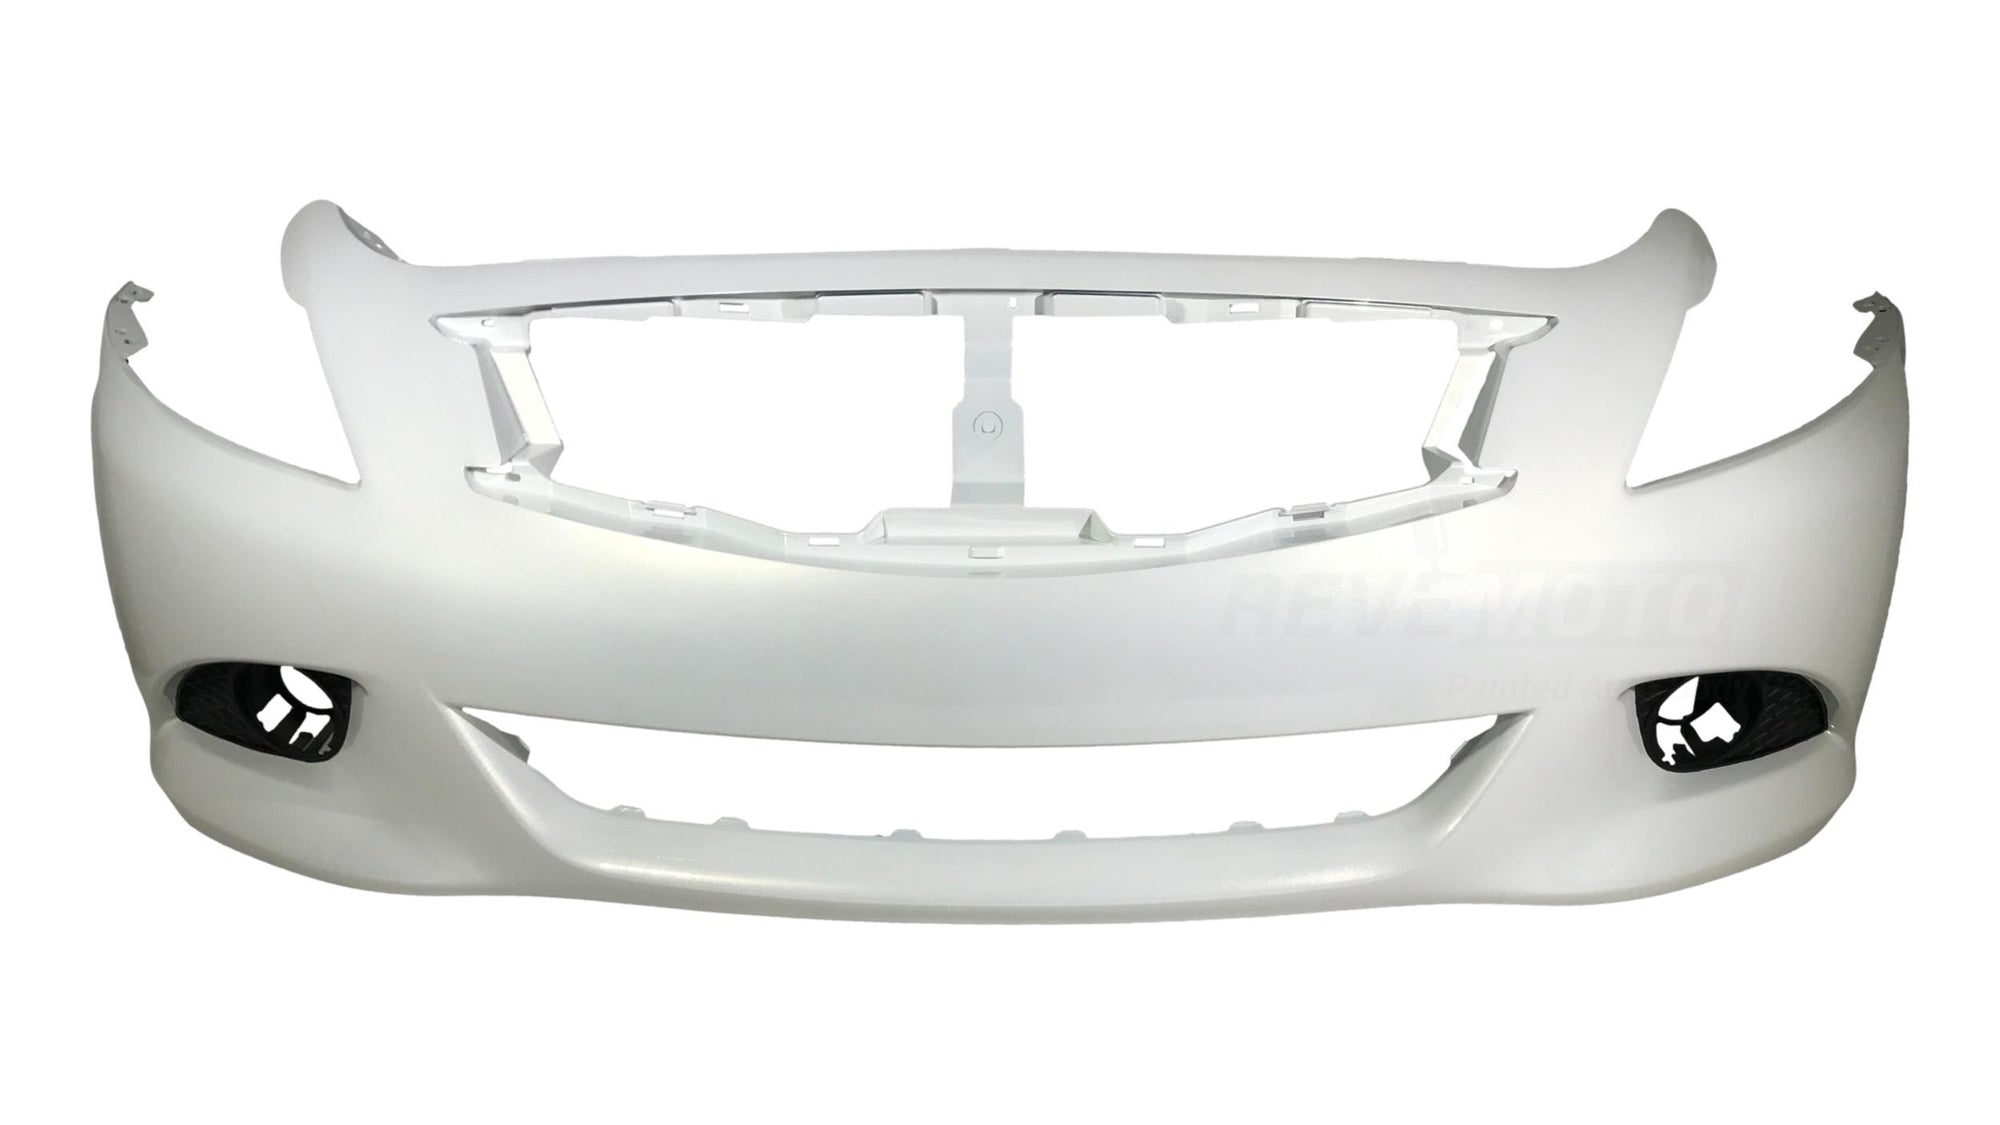 2010-2013 Infiniti G37 Front Bumper Painted Moonlight White Pearl (QAA) 620221NF0H/FBM221NF0H IN1000246